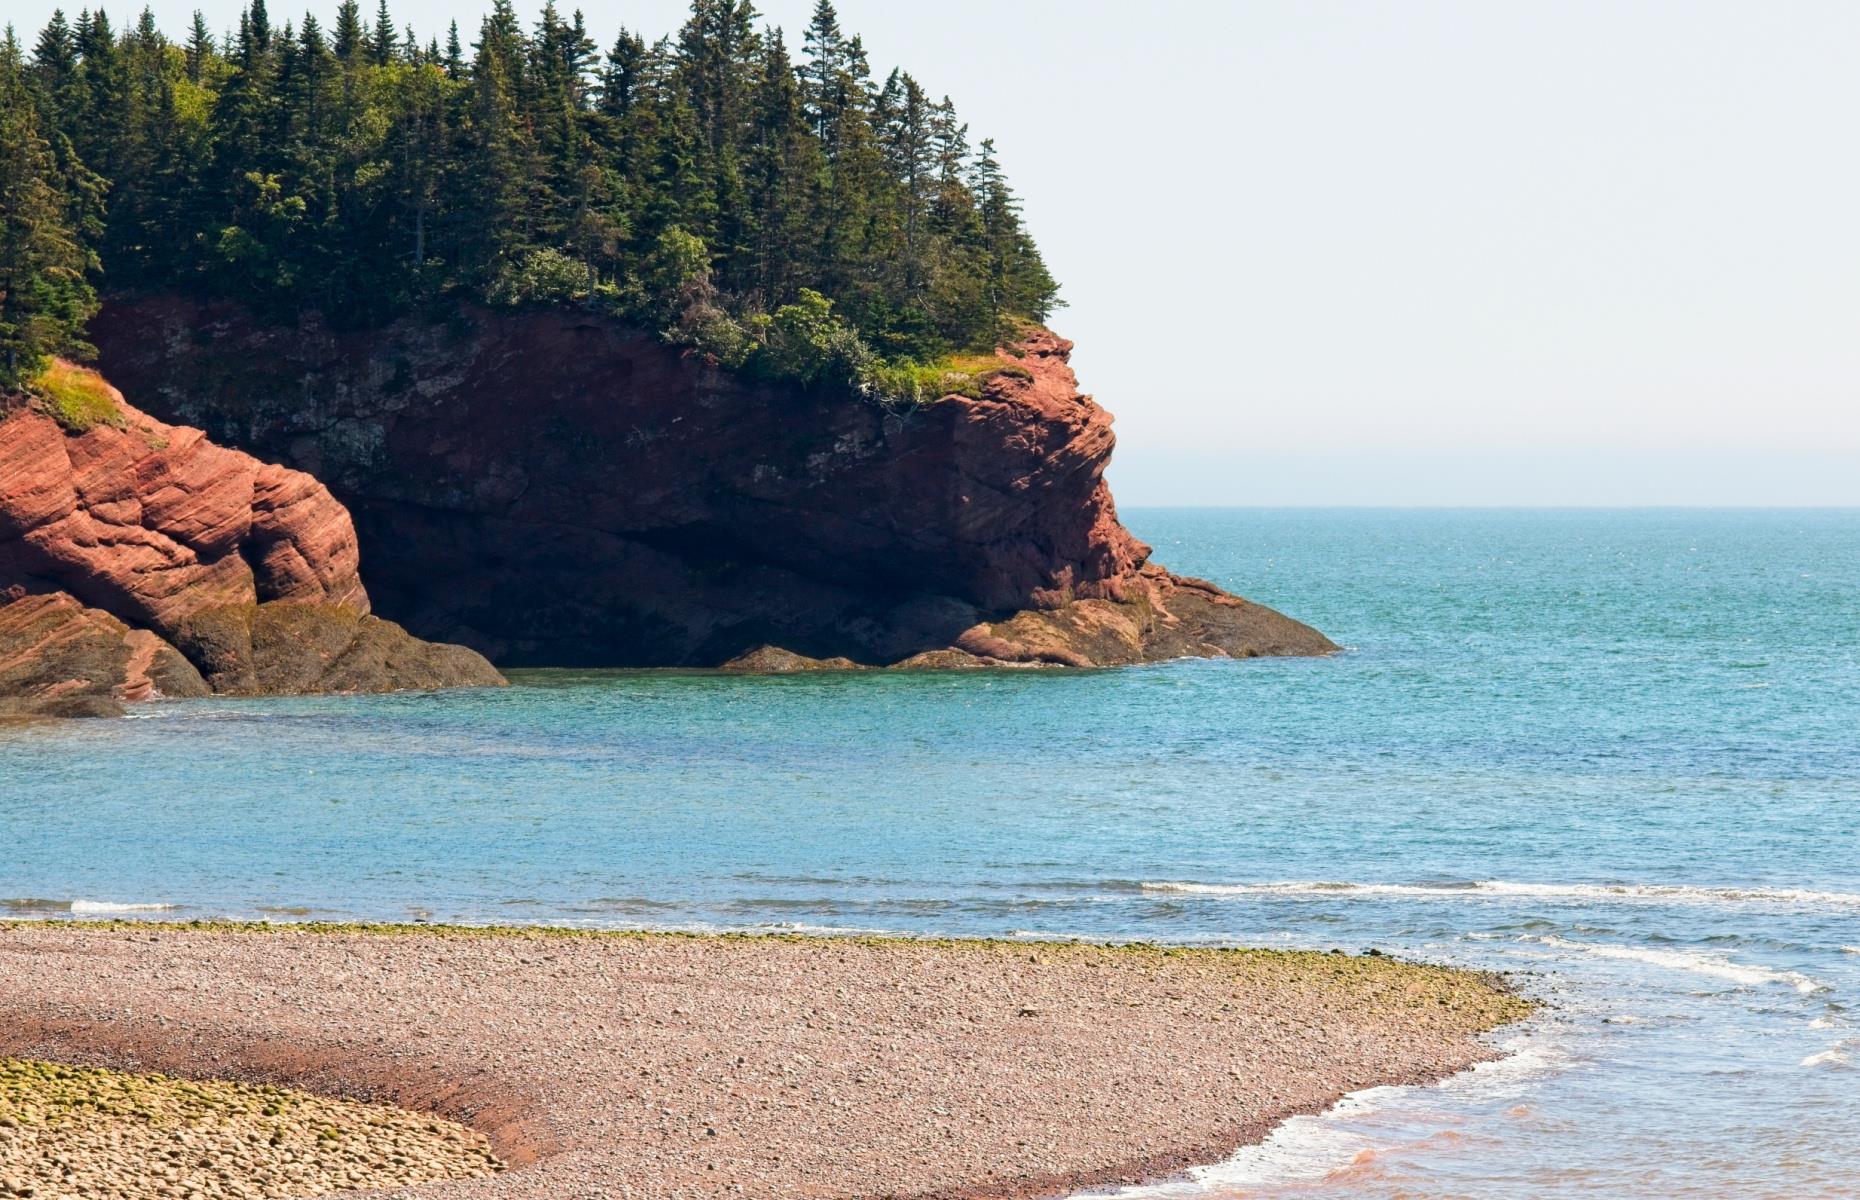 <p>Another natural attraction created by the Bay of Fundy's powerful tides, these sandstone caves are submerged during high tide. They can only be approached by boat during that time, but at low tide you can explore them on foot – walking to the entrances across the ocean floor. Visitors can wonder at the natural rock formations, enjoy chowder at the nearby restaurant or do a spot of birdwatching across the bay. Be sure to consult local tide tables ahead of time if you’re planning to check out the cave interiors.</p>